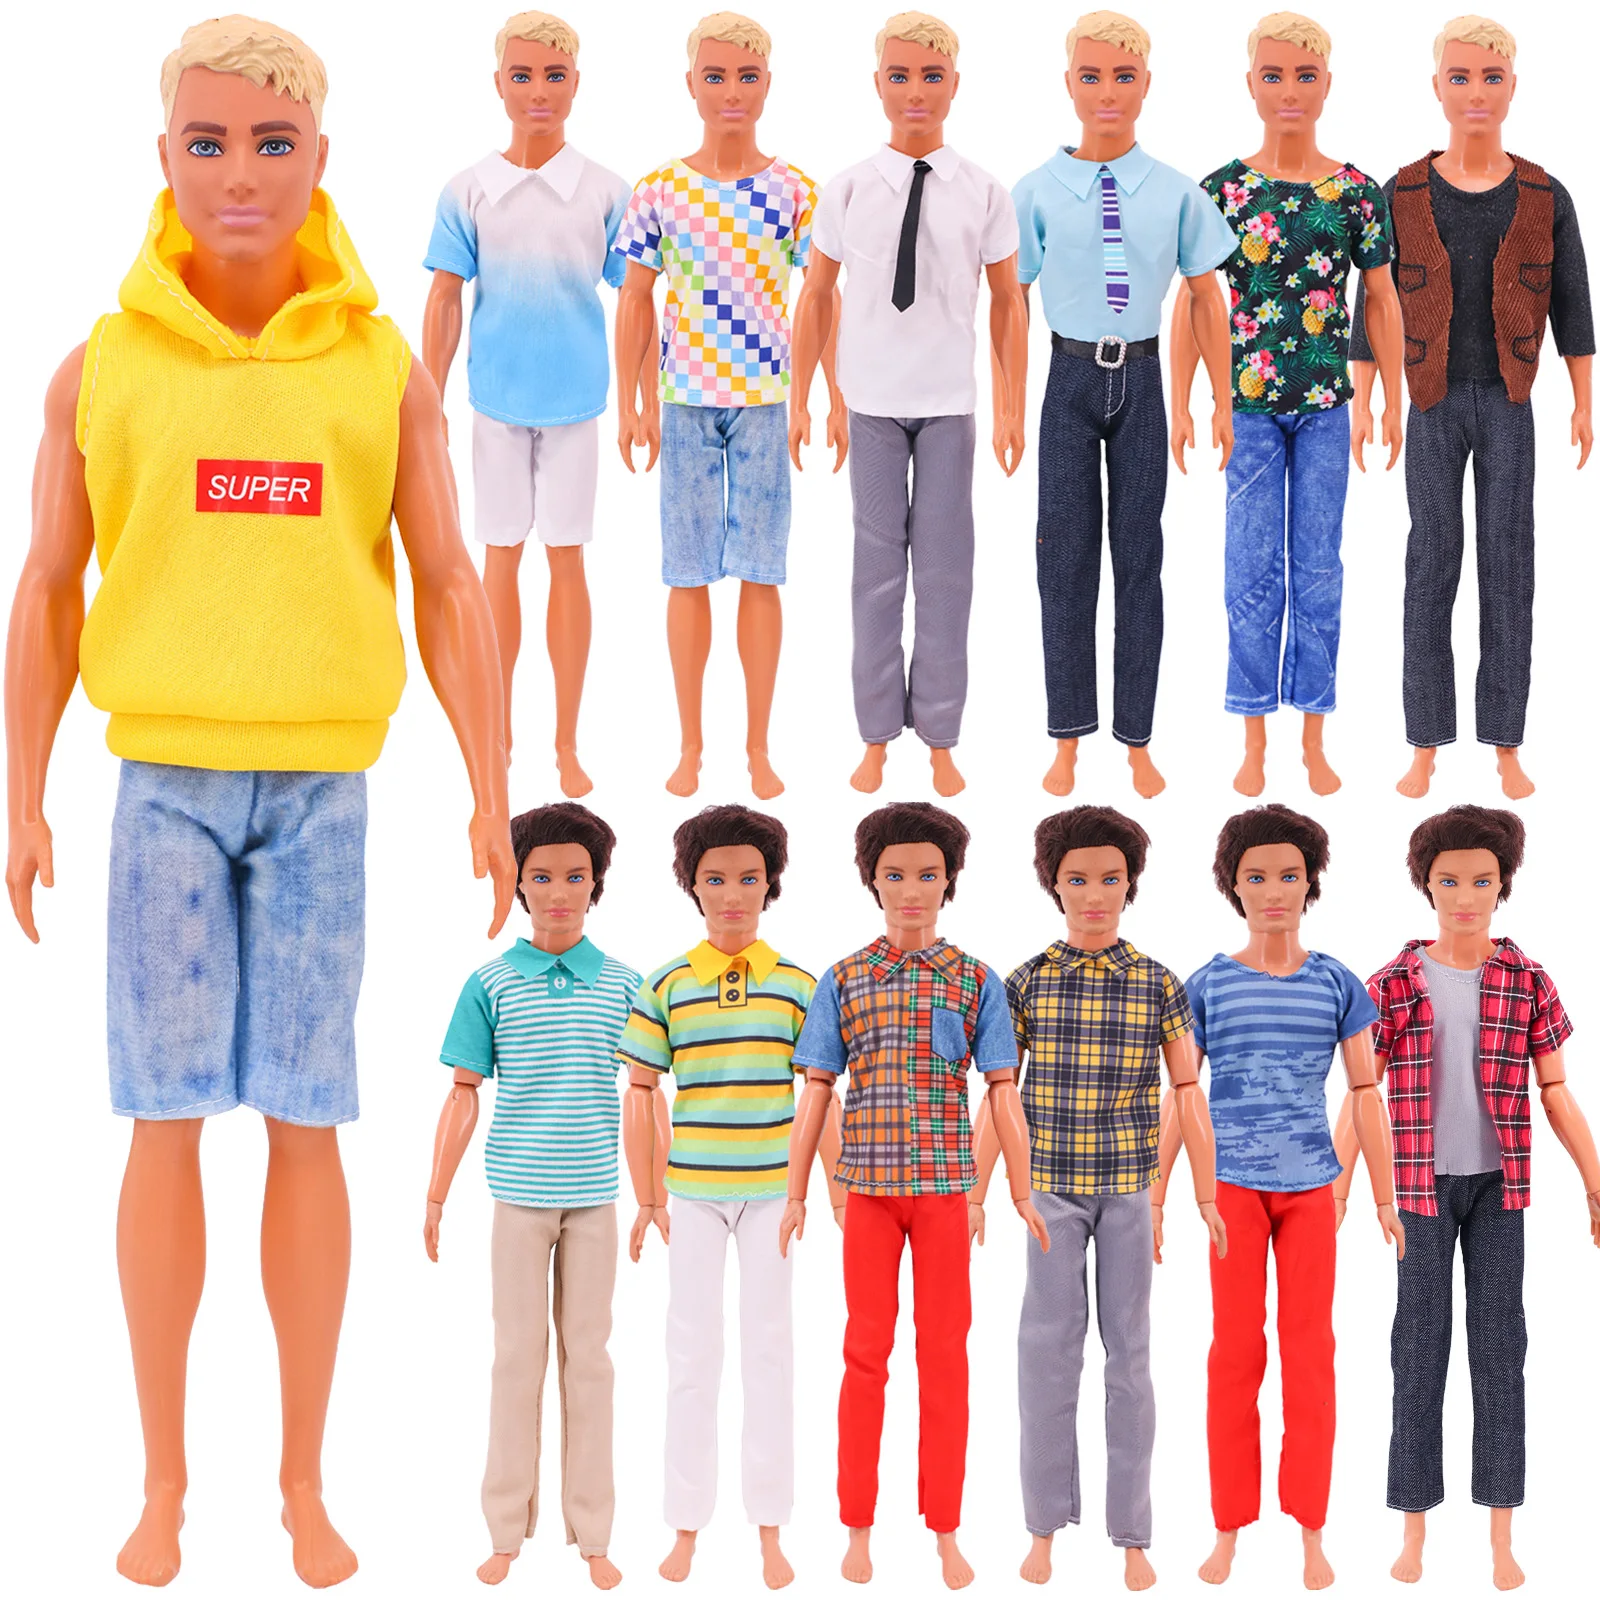 Ken Boy Doll Clothes Handmade Hoodie Shirt Short Sleeve Trousers Fashion Summer New Product For 11.8 Inch Boy Dolls Children Toy handmade fashion 18 inch doll clothes american girl doll accessories suit leopard print coat trousers chirldern children gifts